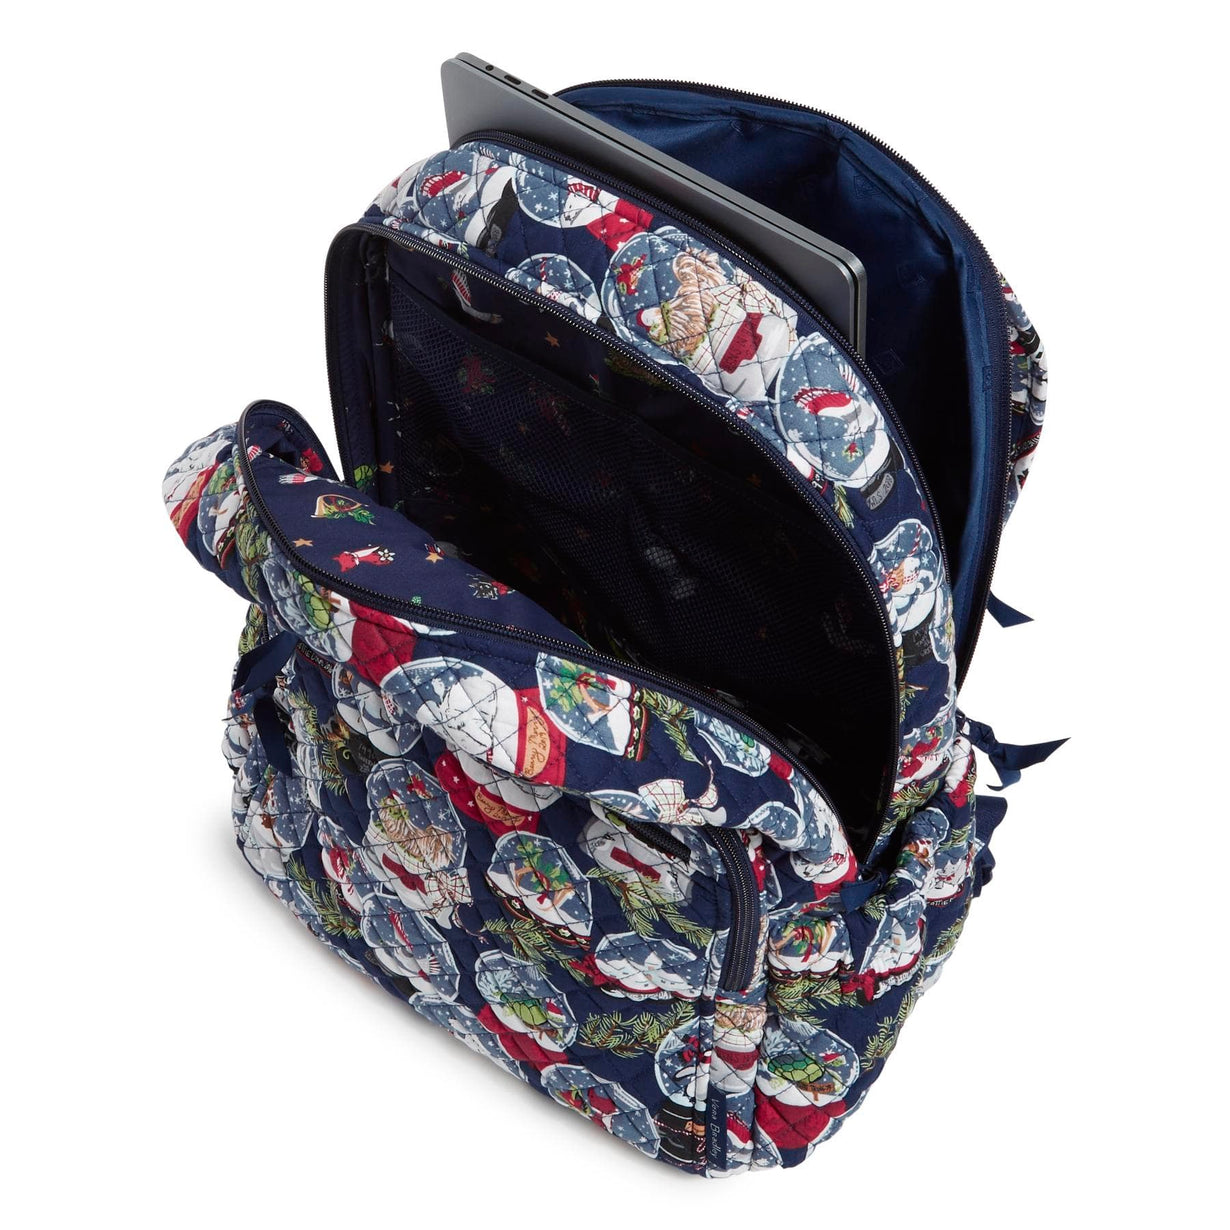 Tanger Outlets, Riverhead - Vera Bradley - Buy any BACKPACK & get a LUNCH  BUNCH for Only $9.99 or $12.99. See store for details.